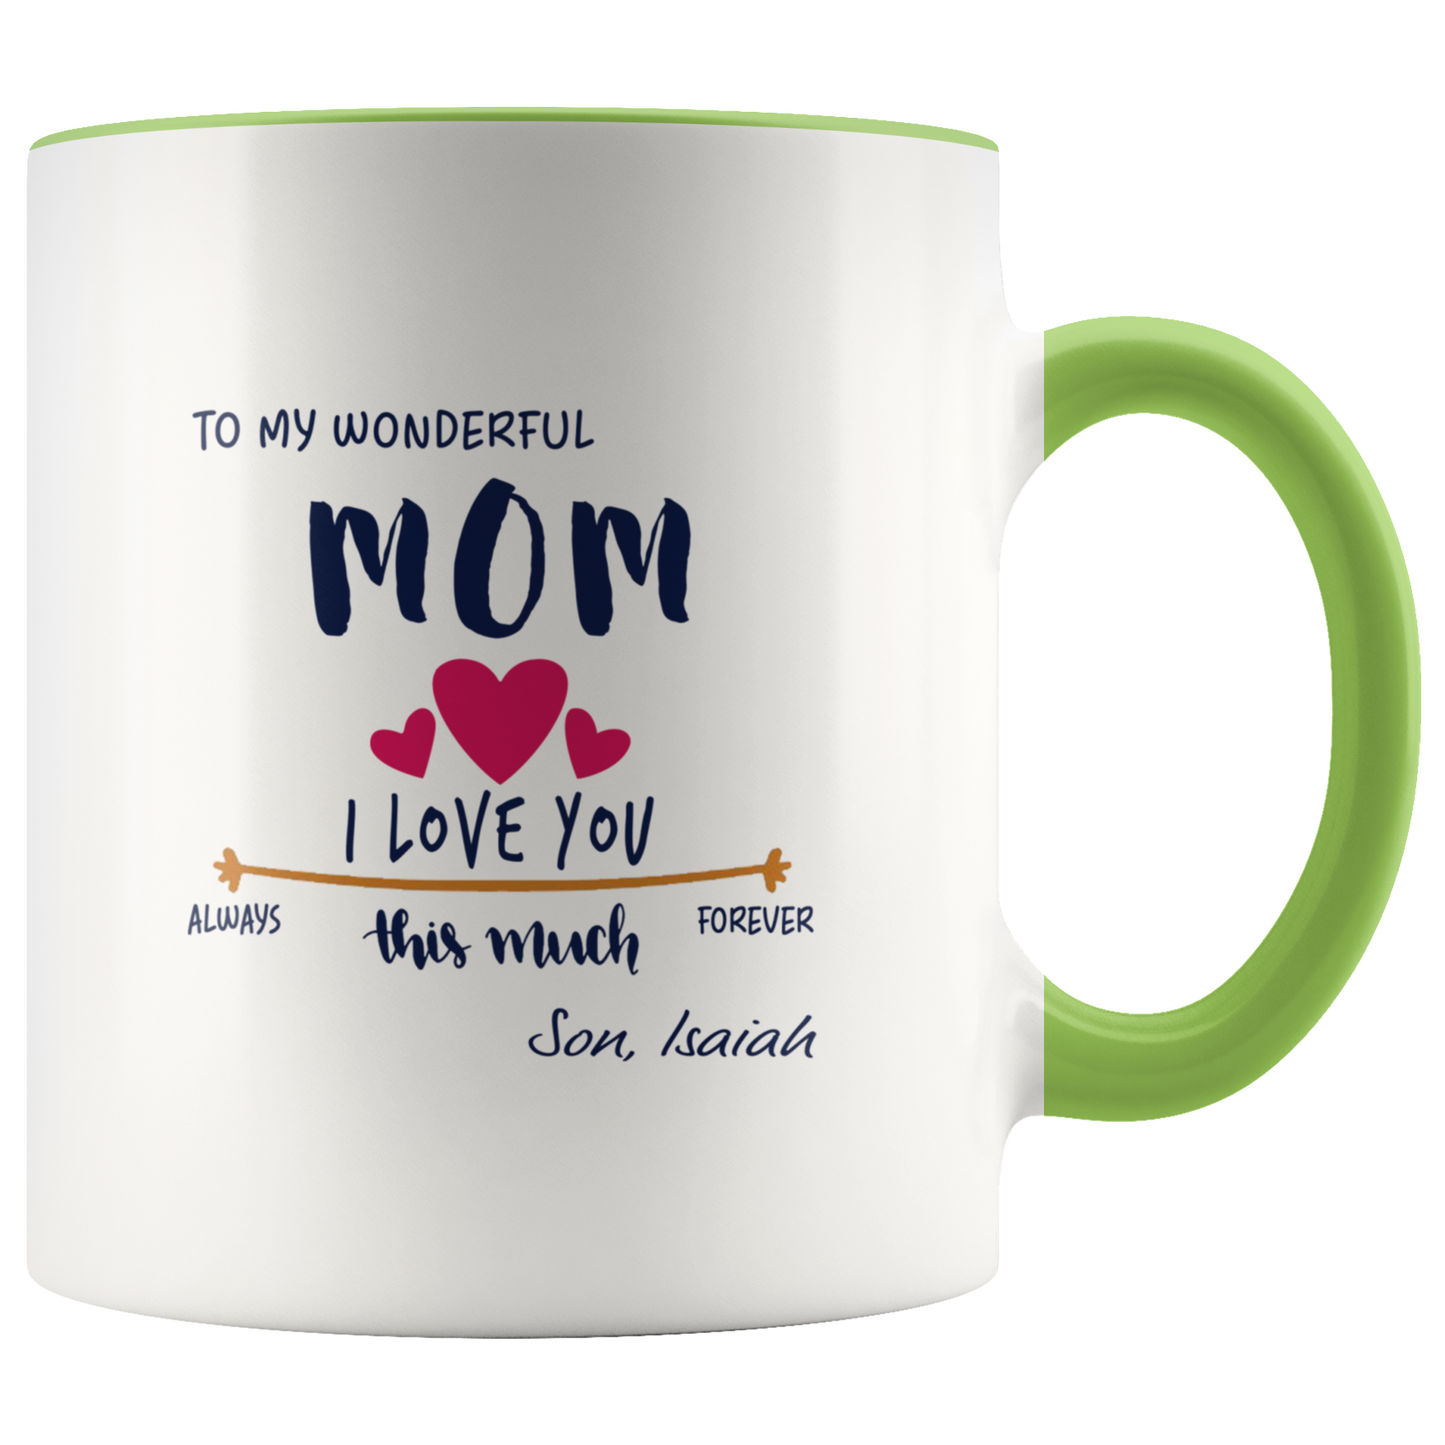 M-21404828-sp-23811 - [ Isaiah | 1 | 1 ]Mother Day Gifts From Son Isaiah - To My Wonderful Mom I Lov